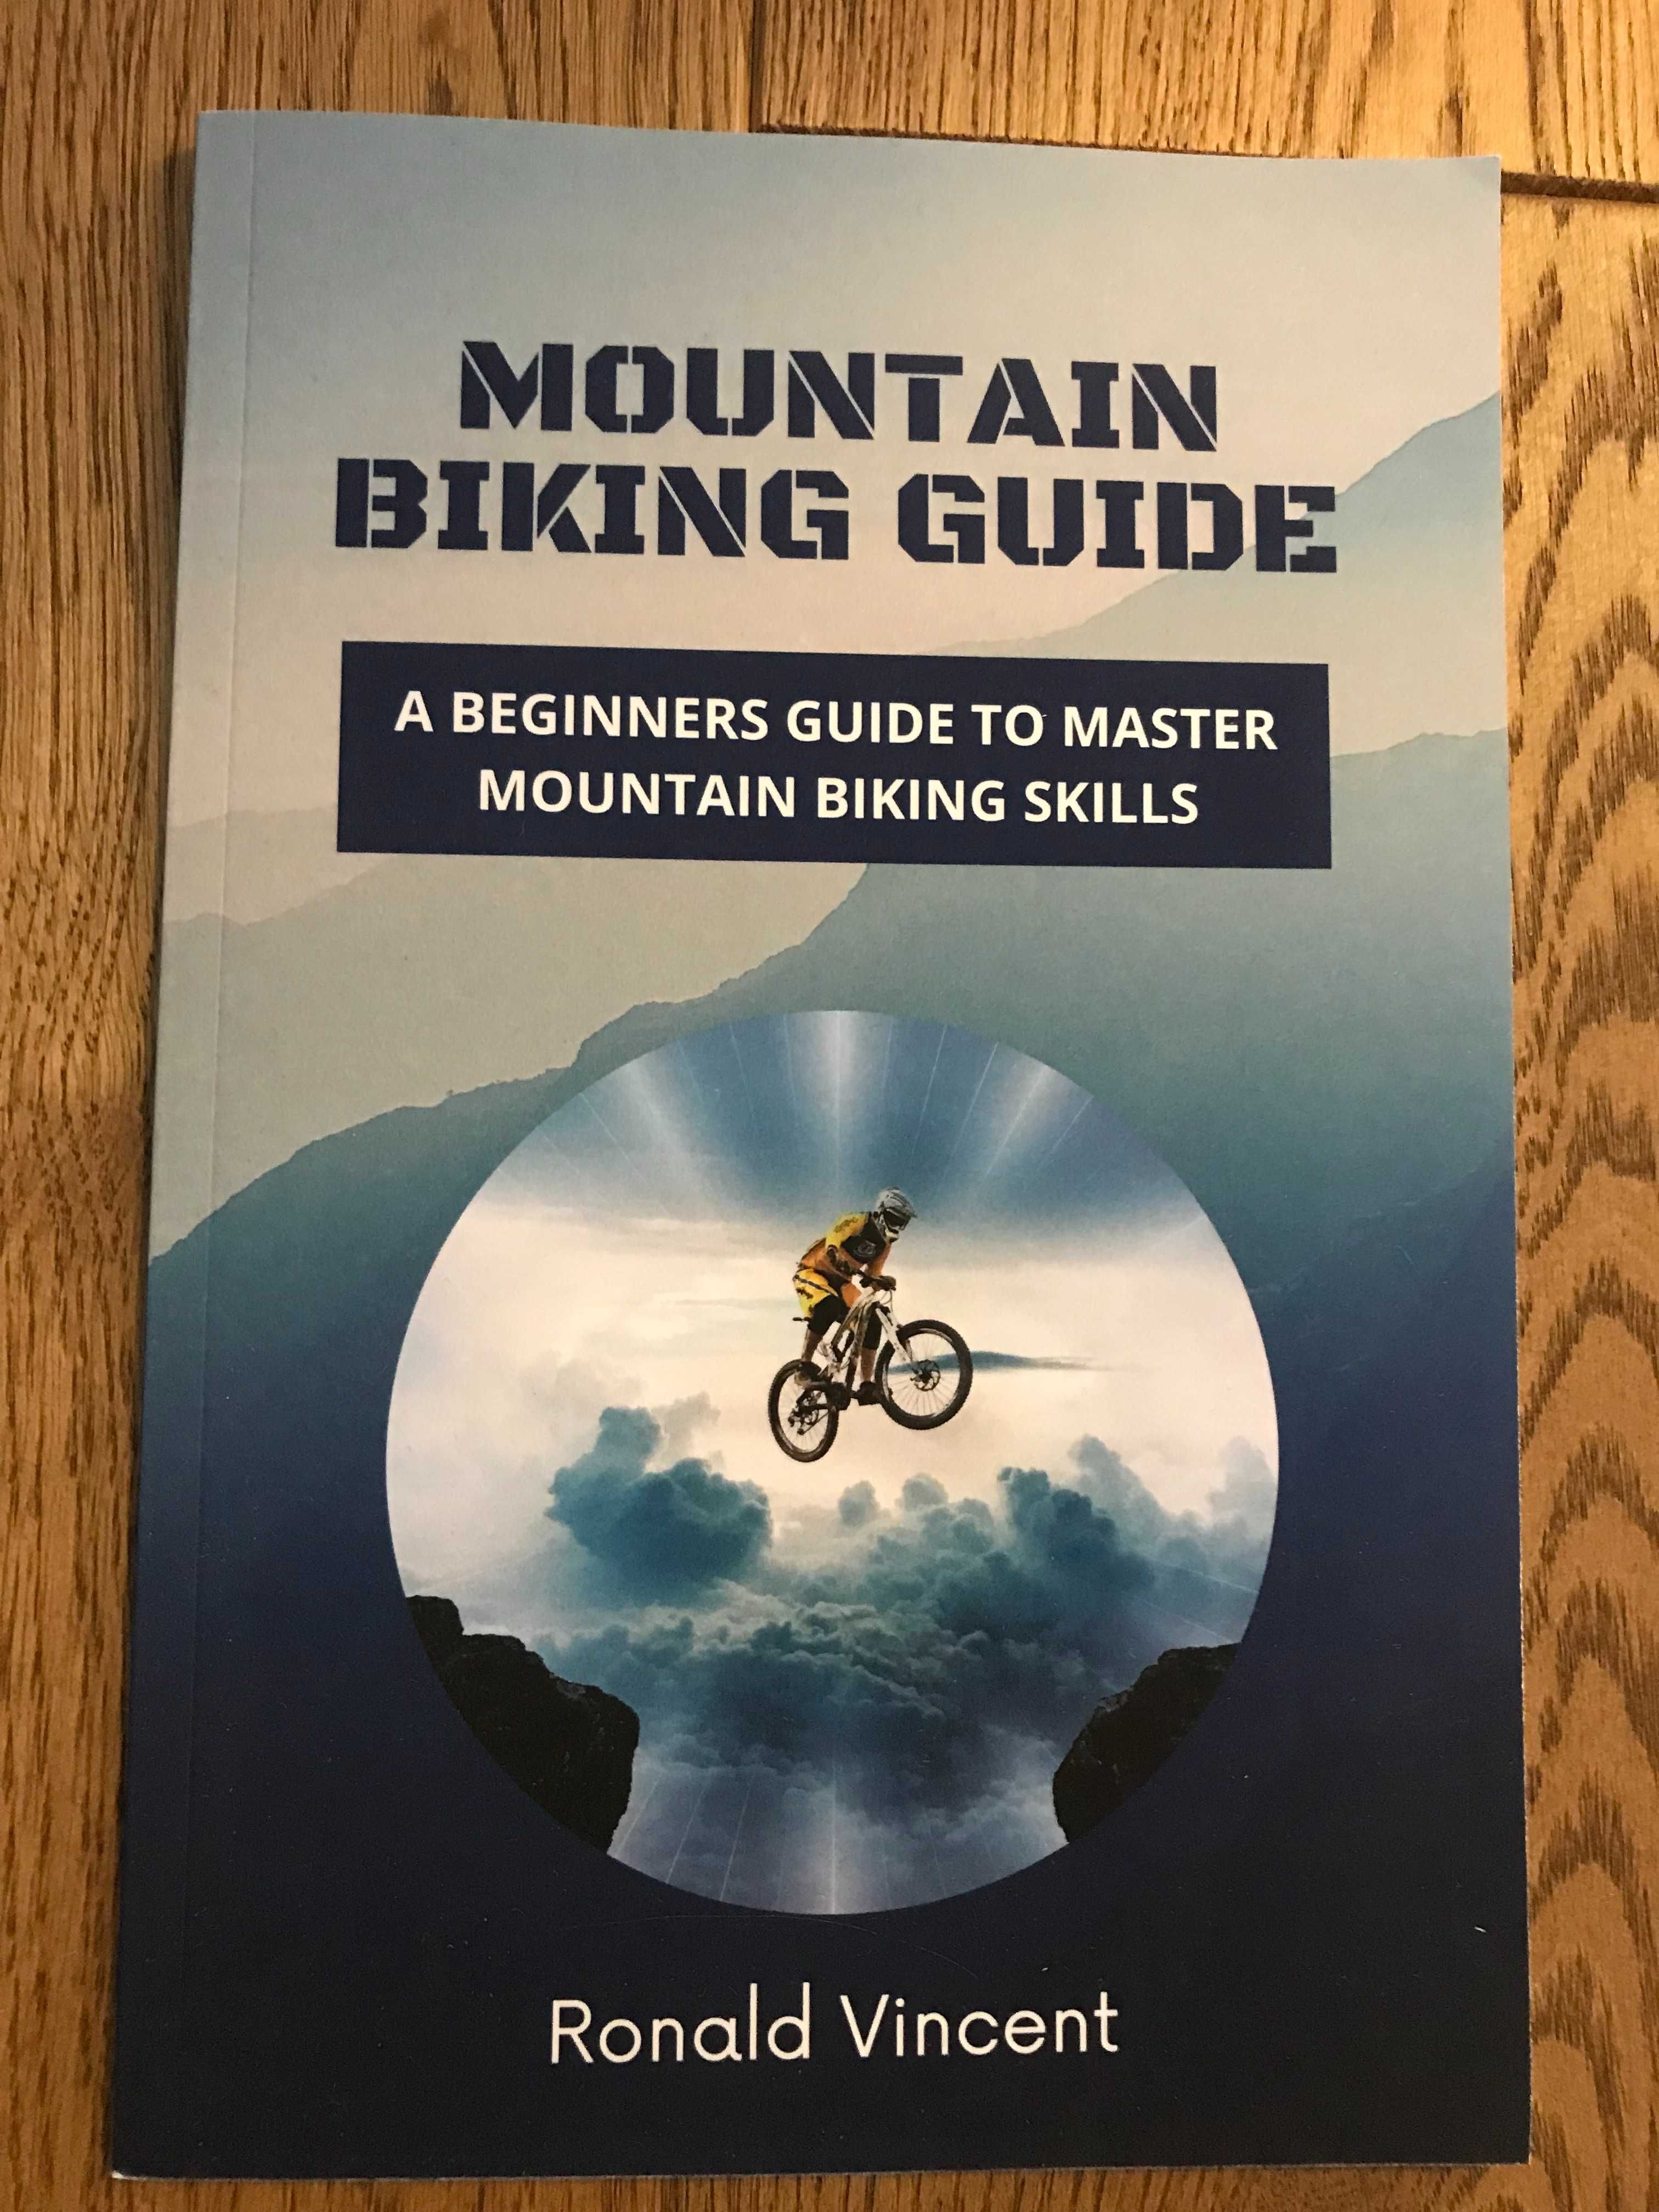 Mountain Biking Guide A Beginners Guide to Master, Ronald Vincent